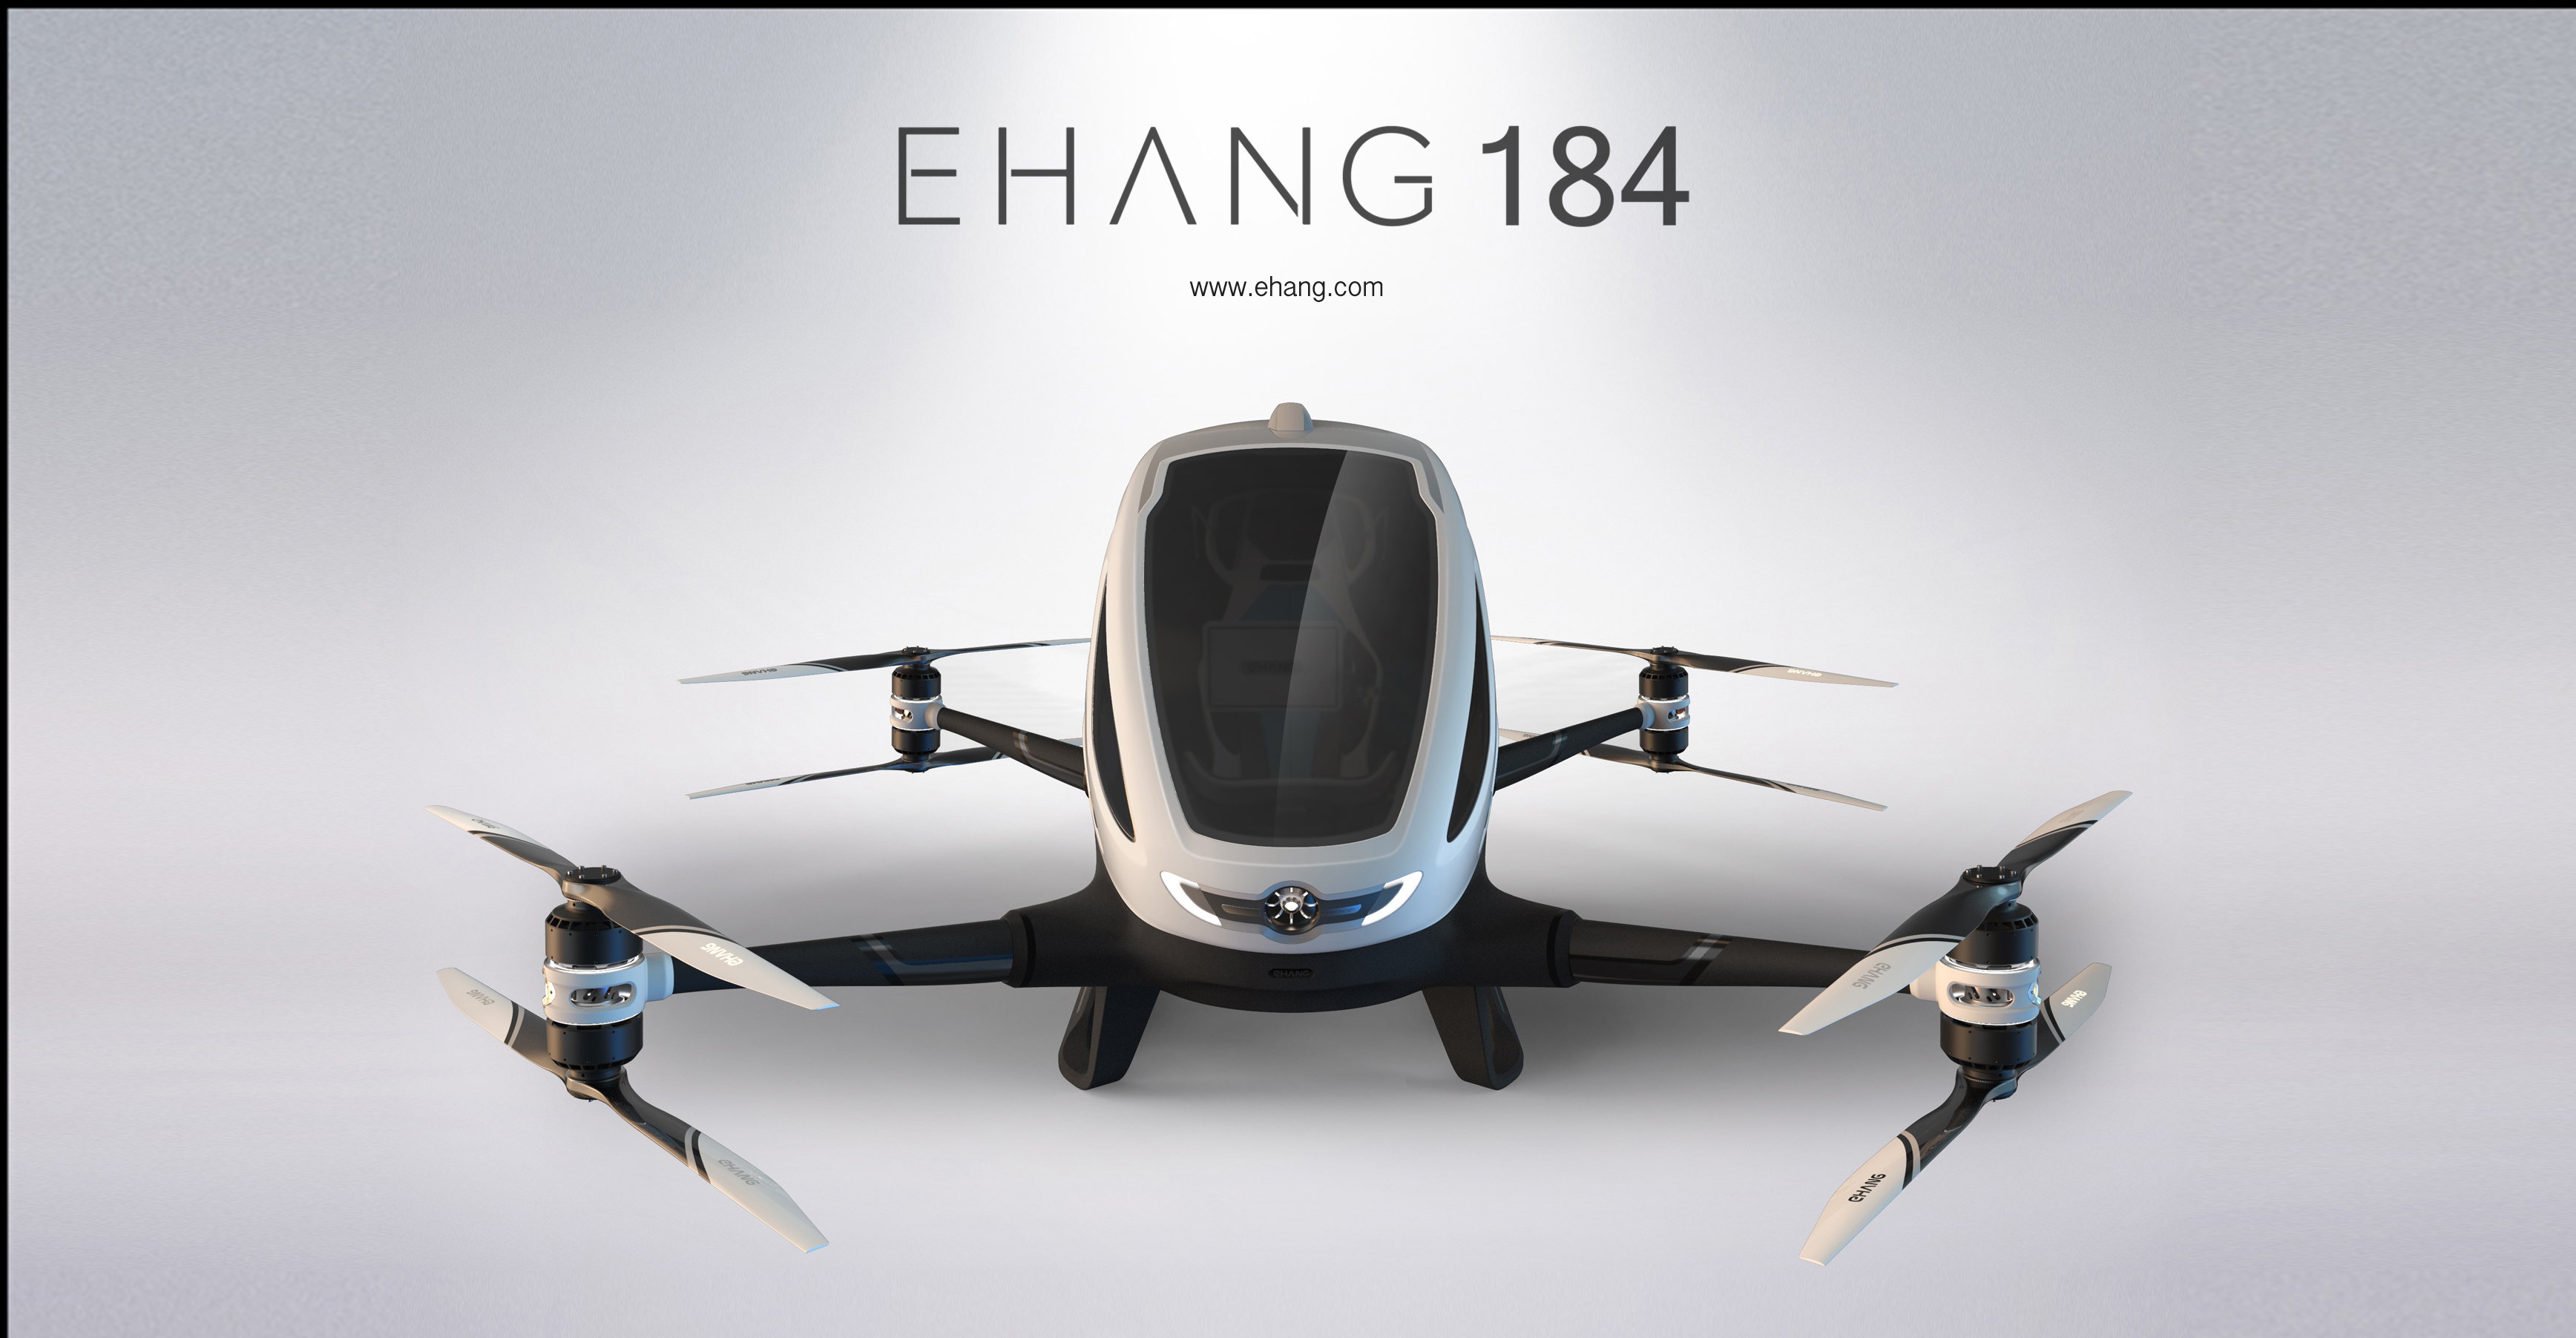 Self-Flying Taxis